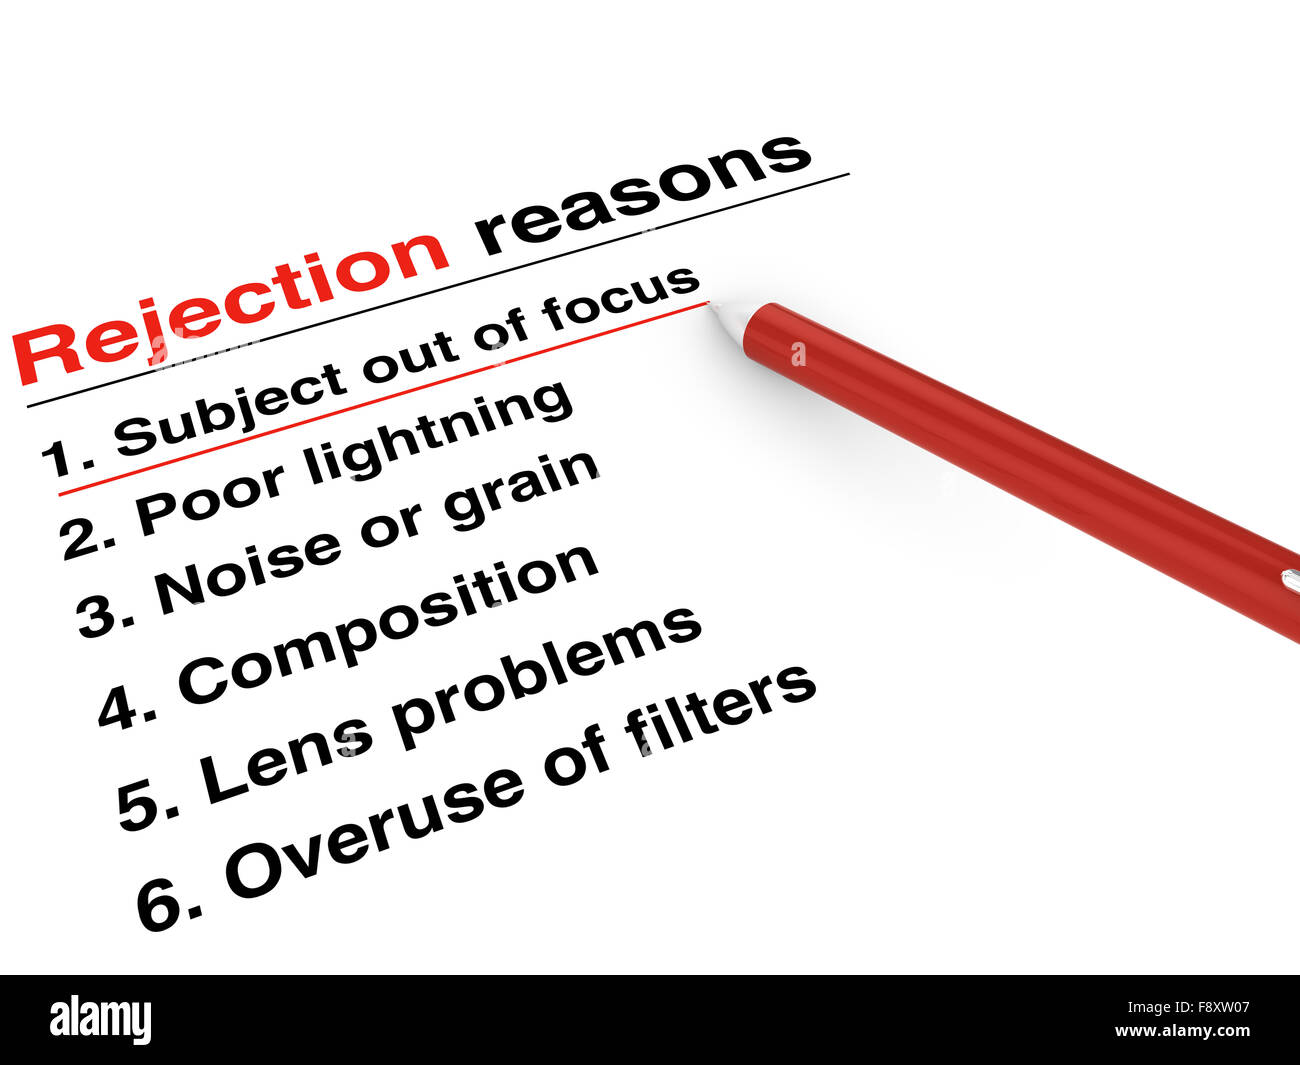 Rejection reasons checklist and red pen on white Stock Photo